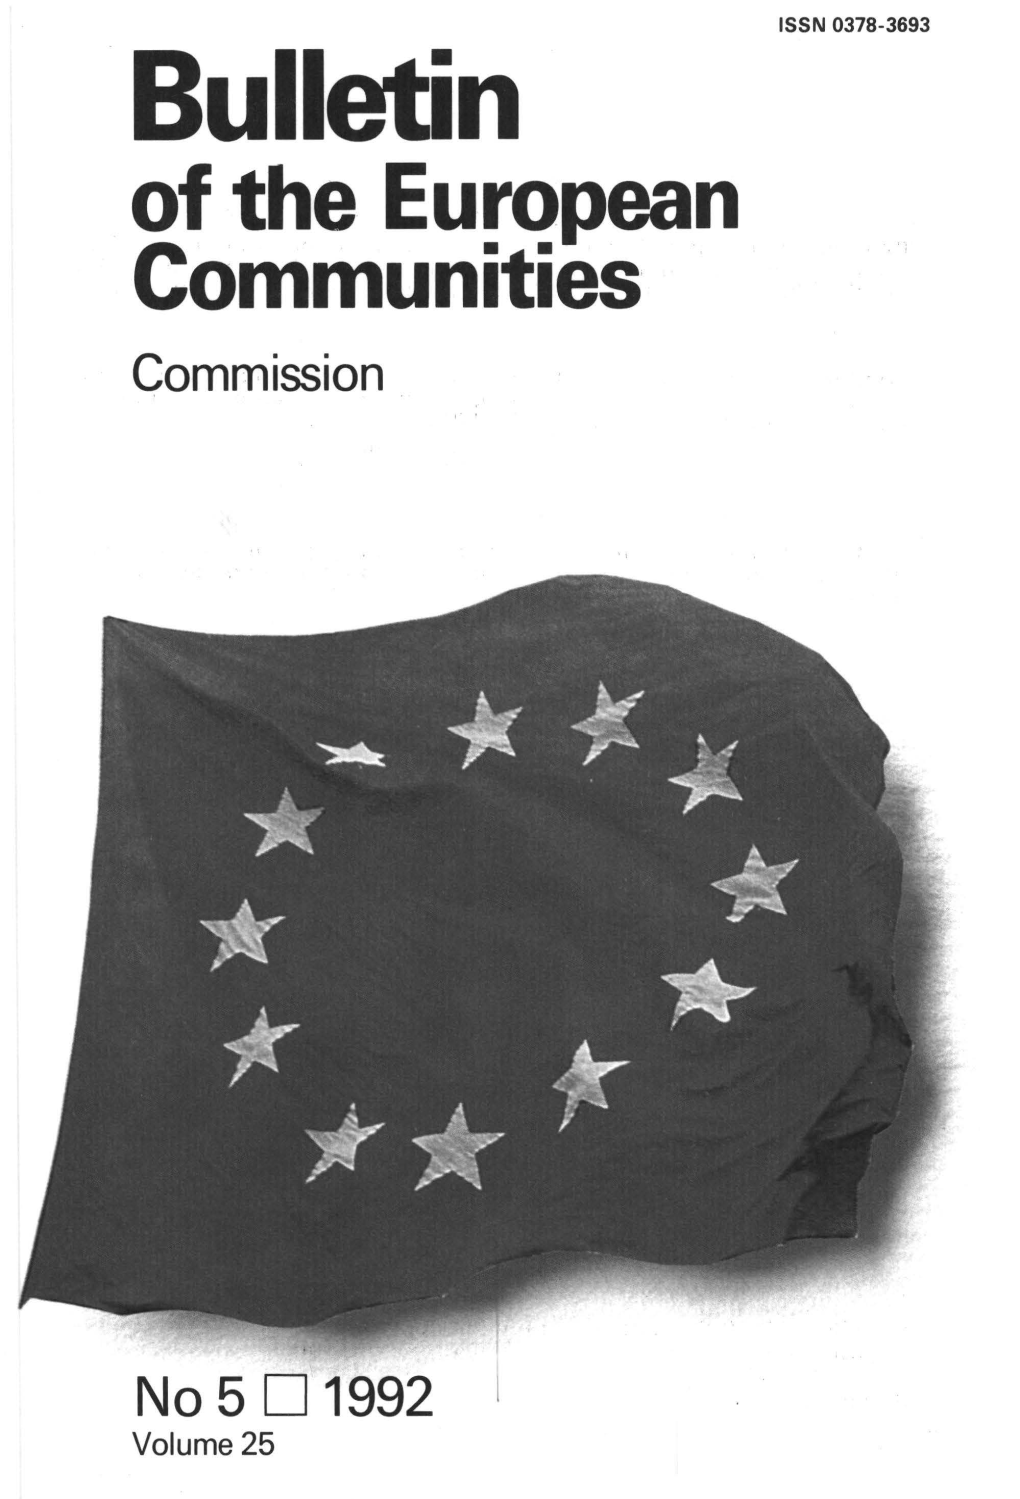 ·Bulletin of the European Communities Commission